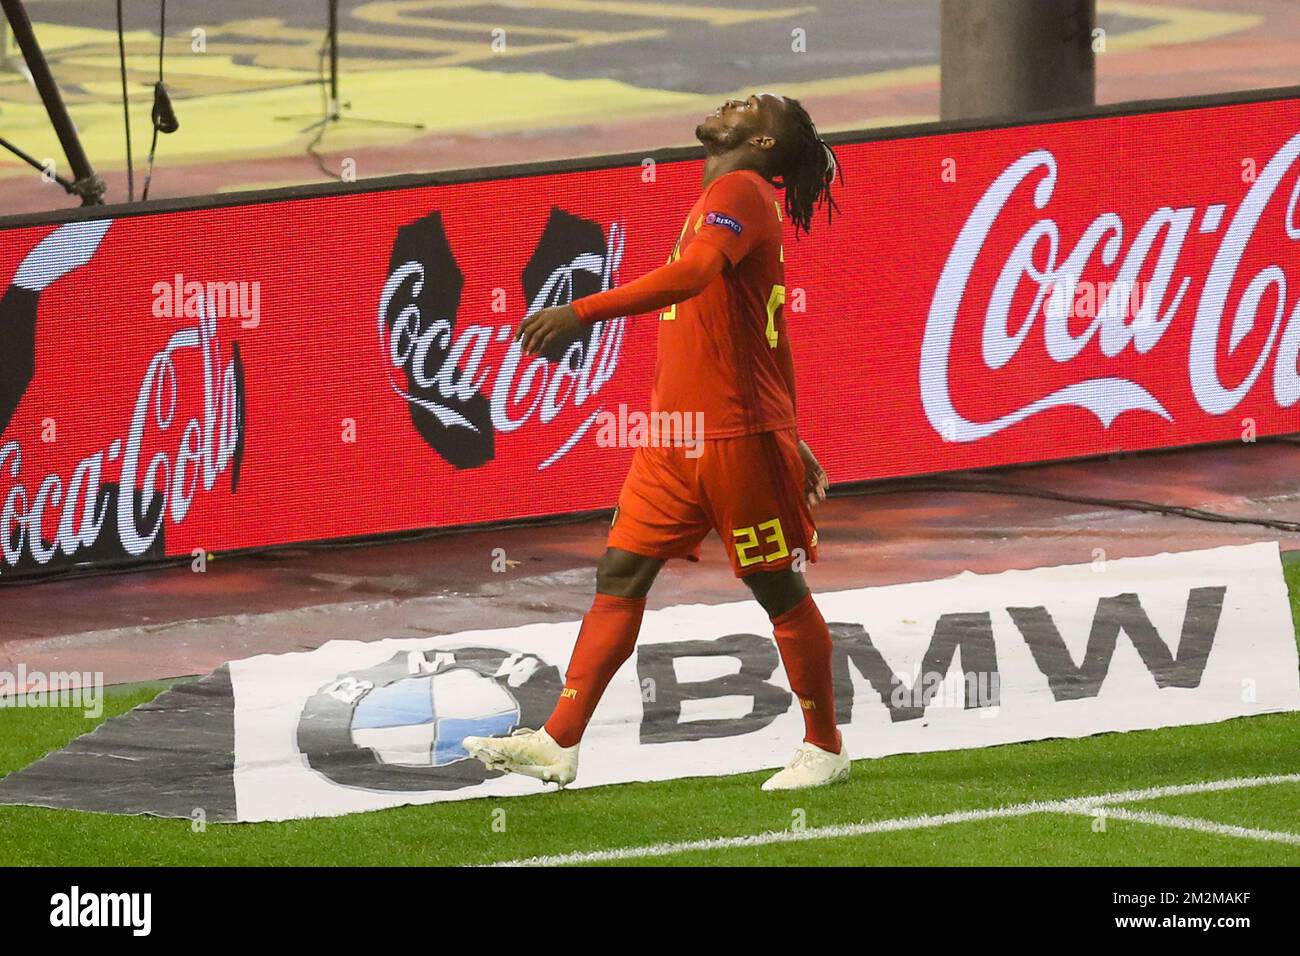 Belgium's Michy Batshuayi celebrates after scoring the 2-0 goal during the match between Belgian national team the Red Devils and Iceland, in Brussels, Thursday 15 November 2018, in the Nations League. BELGA PHOTO Stock Photo